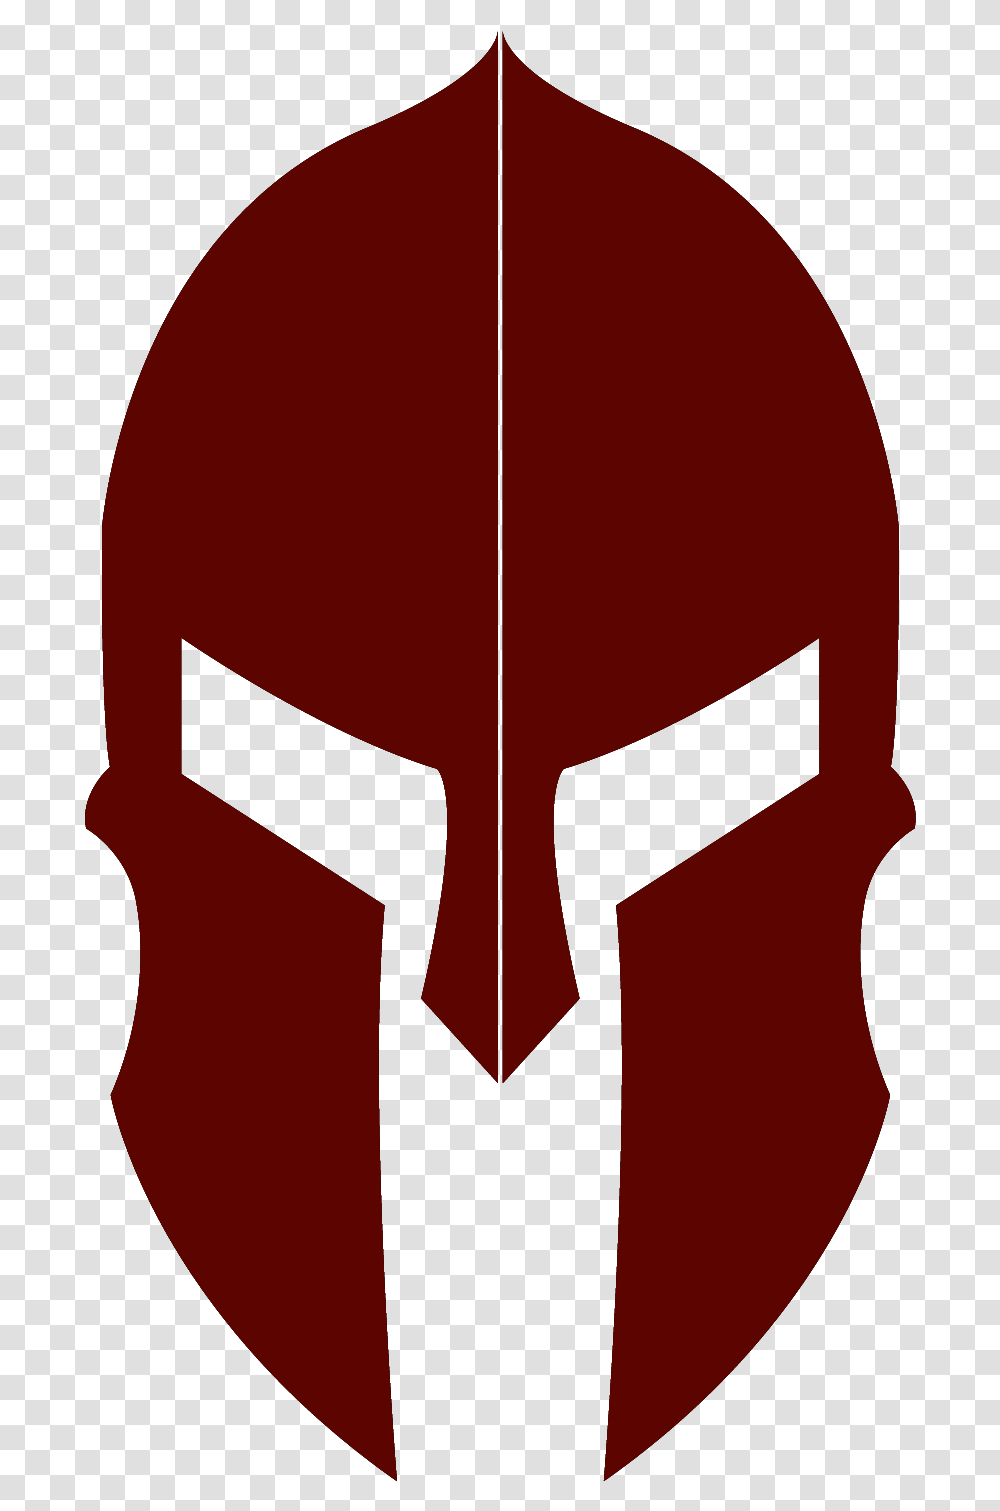 Download The Wings Of Fire Roleplay Wiki Spartan Helmet Spartan Helmet, Text, Maroon, Tulip, Statue Transparent Png